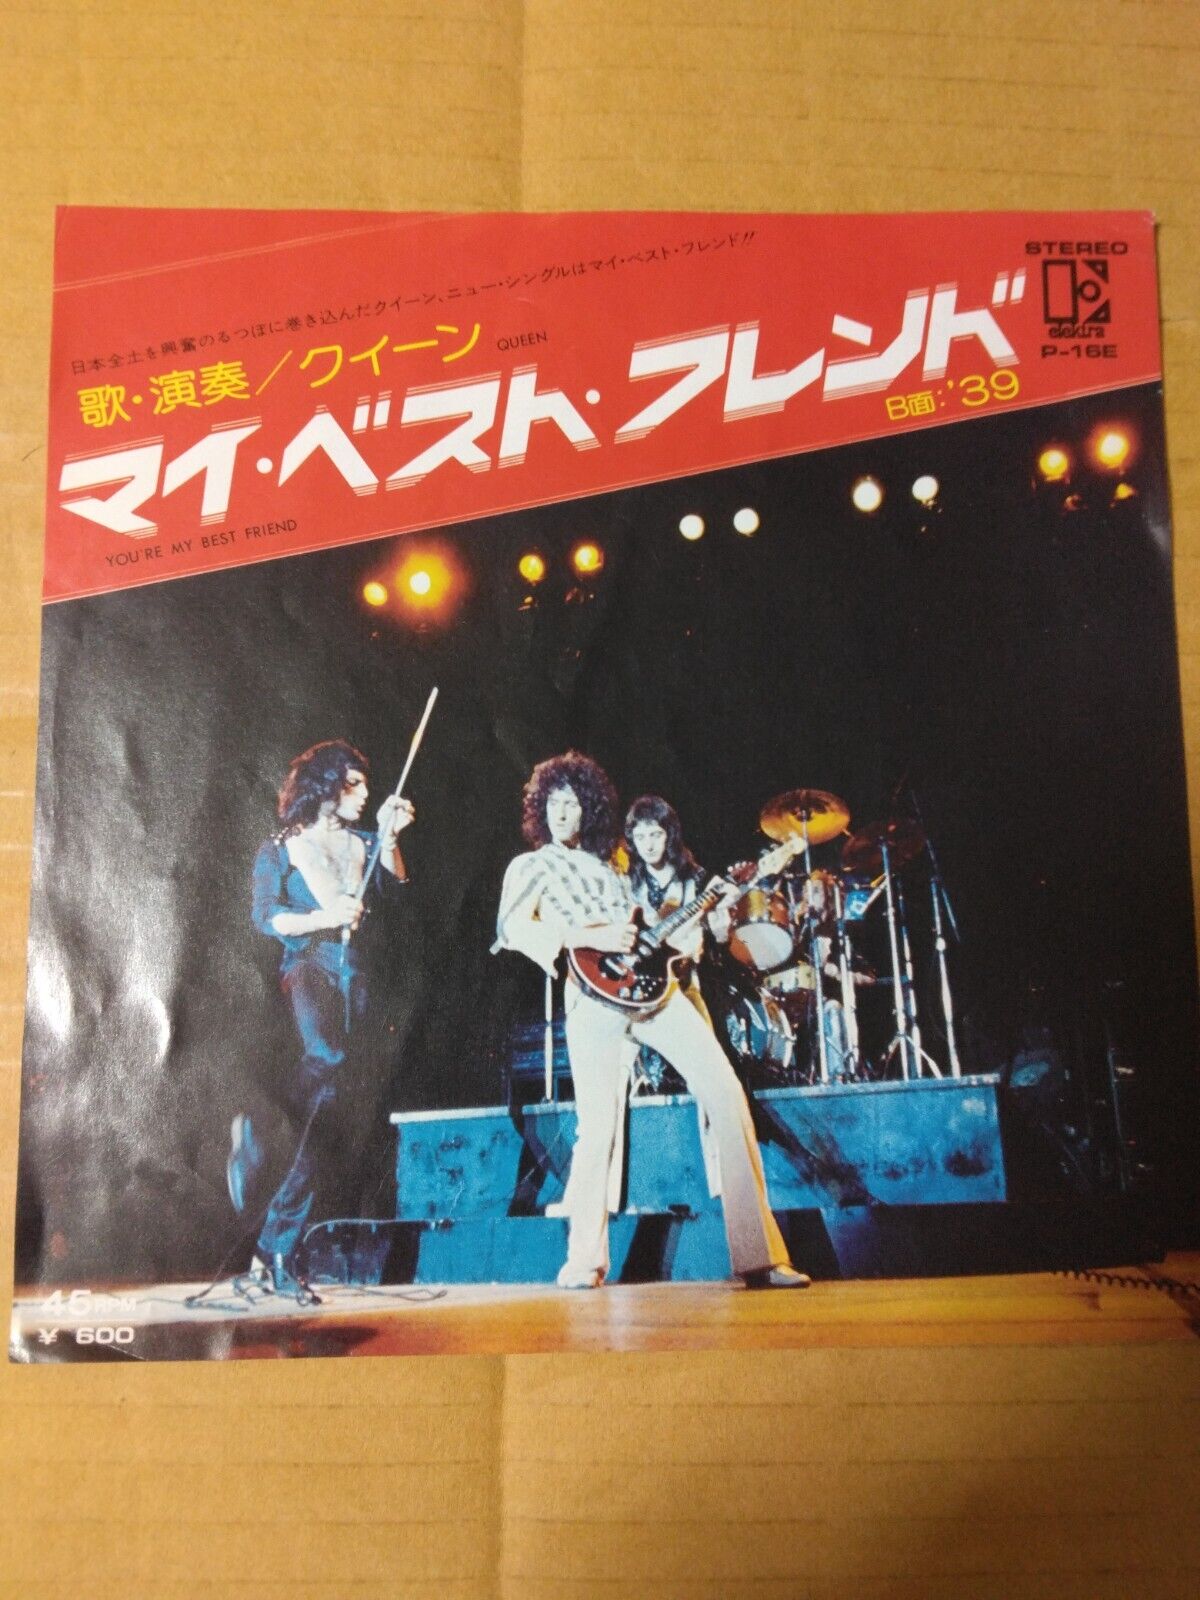 Japanese press 7inch!!!   QUEEN   YOU'RE MY BEST FRIEND / '39